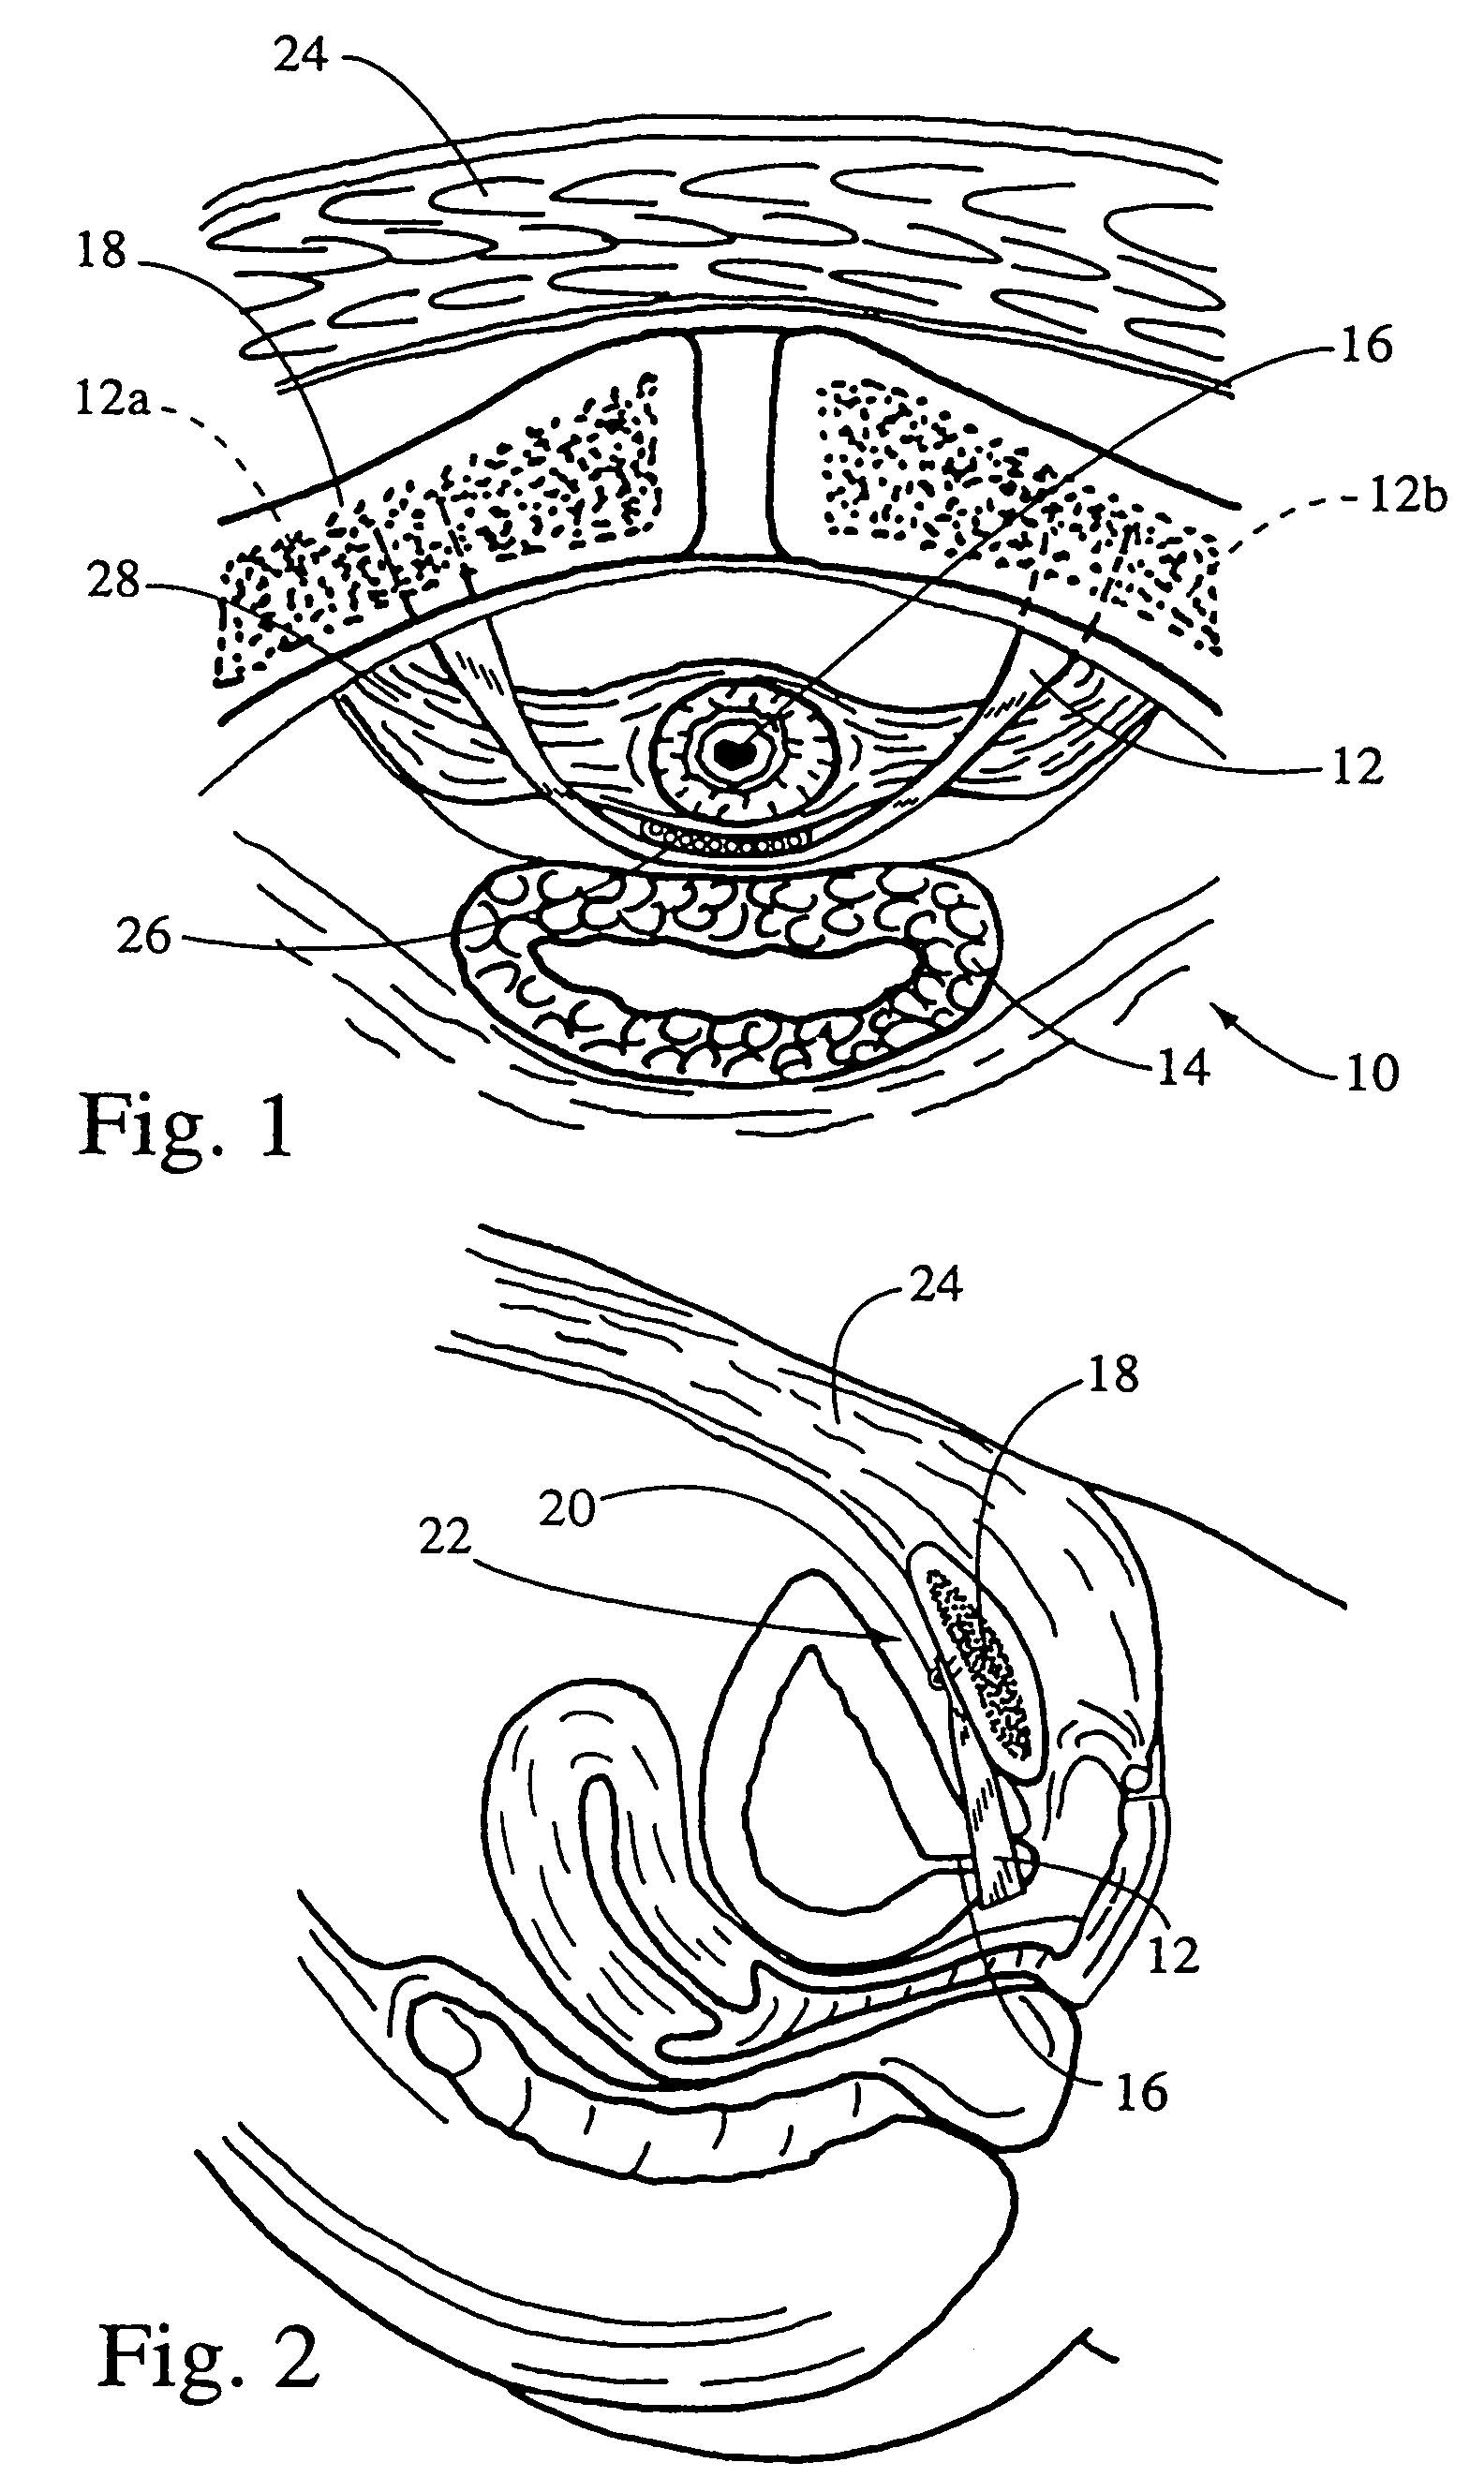 System for securing sutures, grafts and soft tissue to bone and periosteum